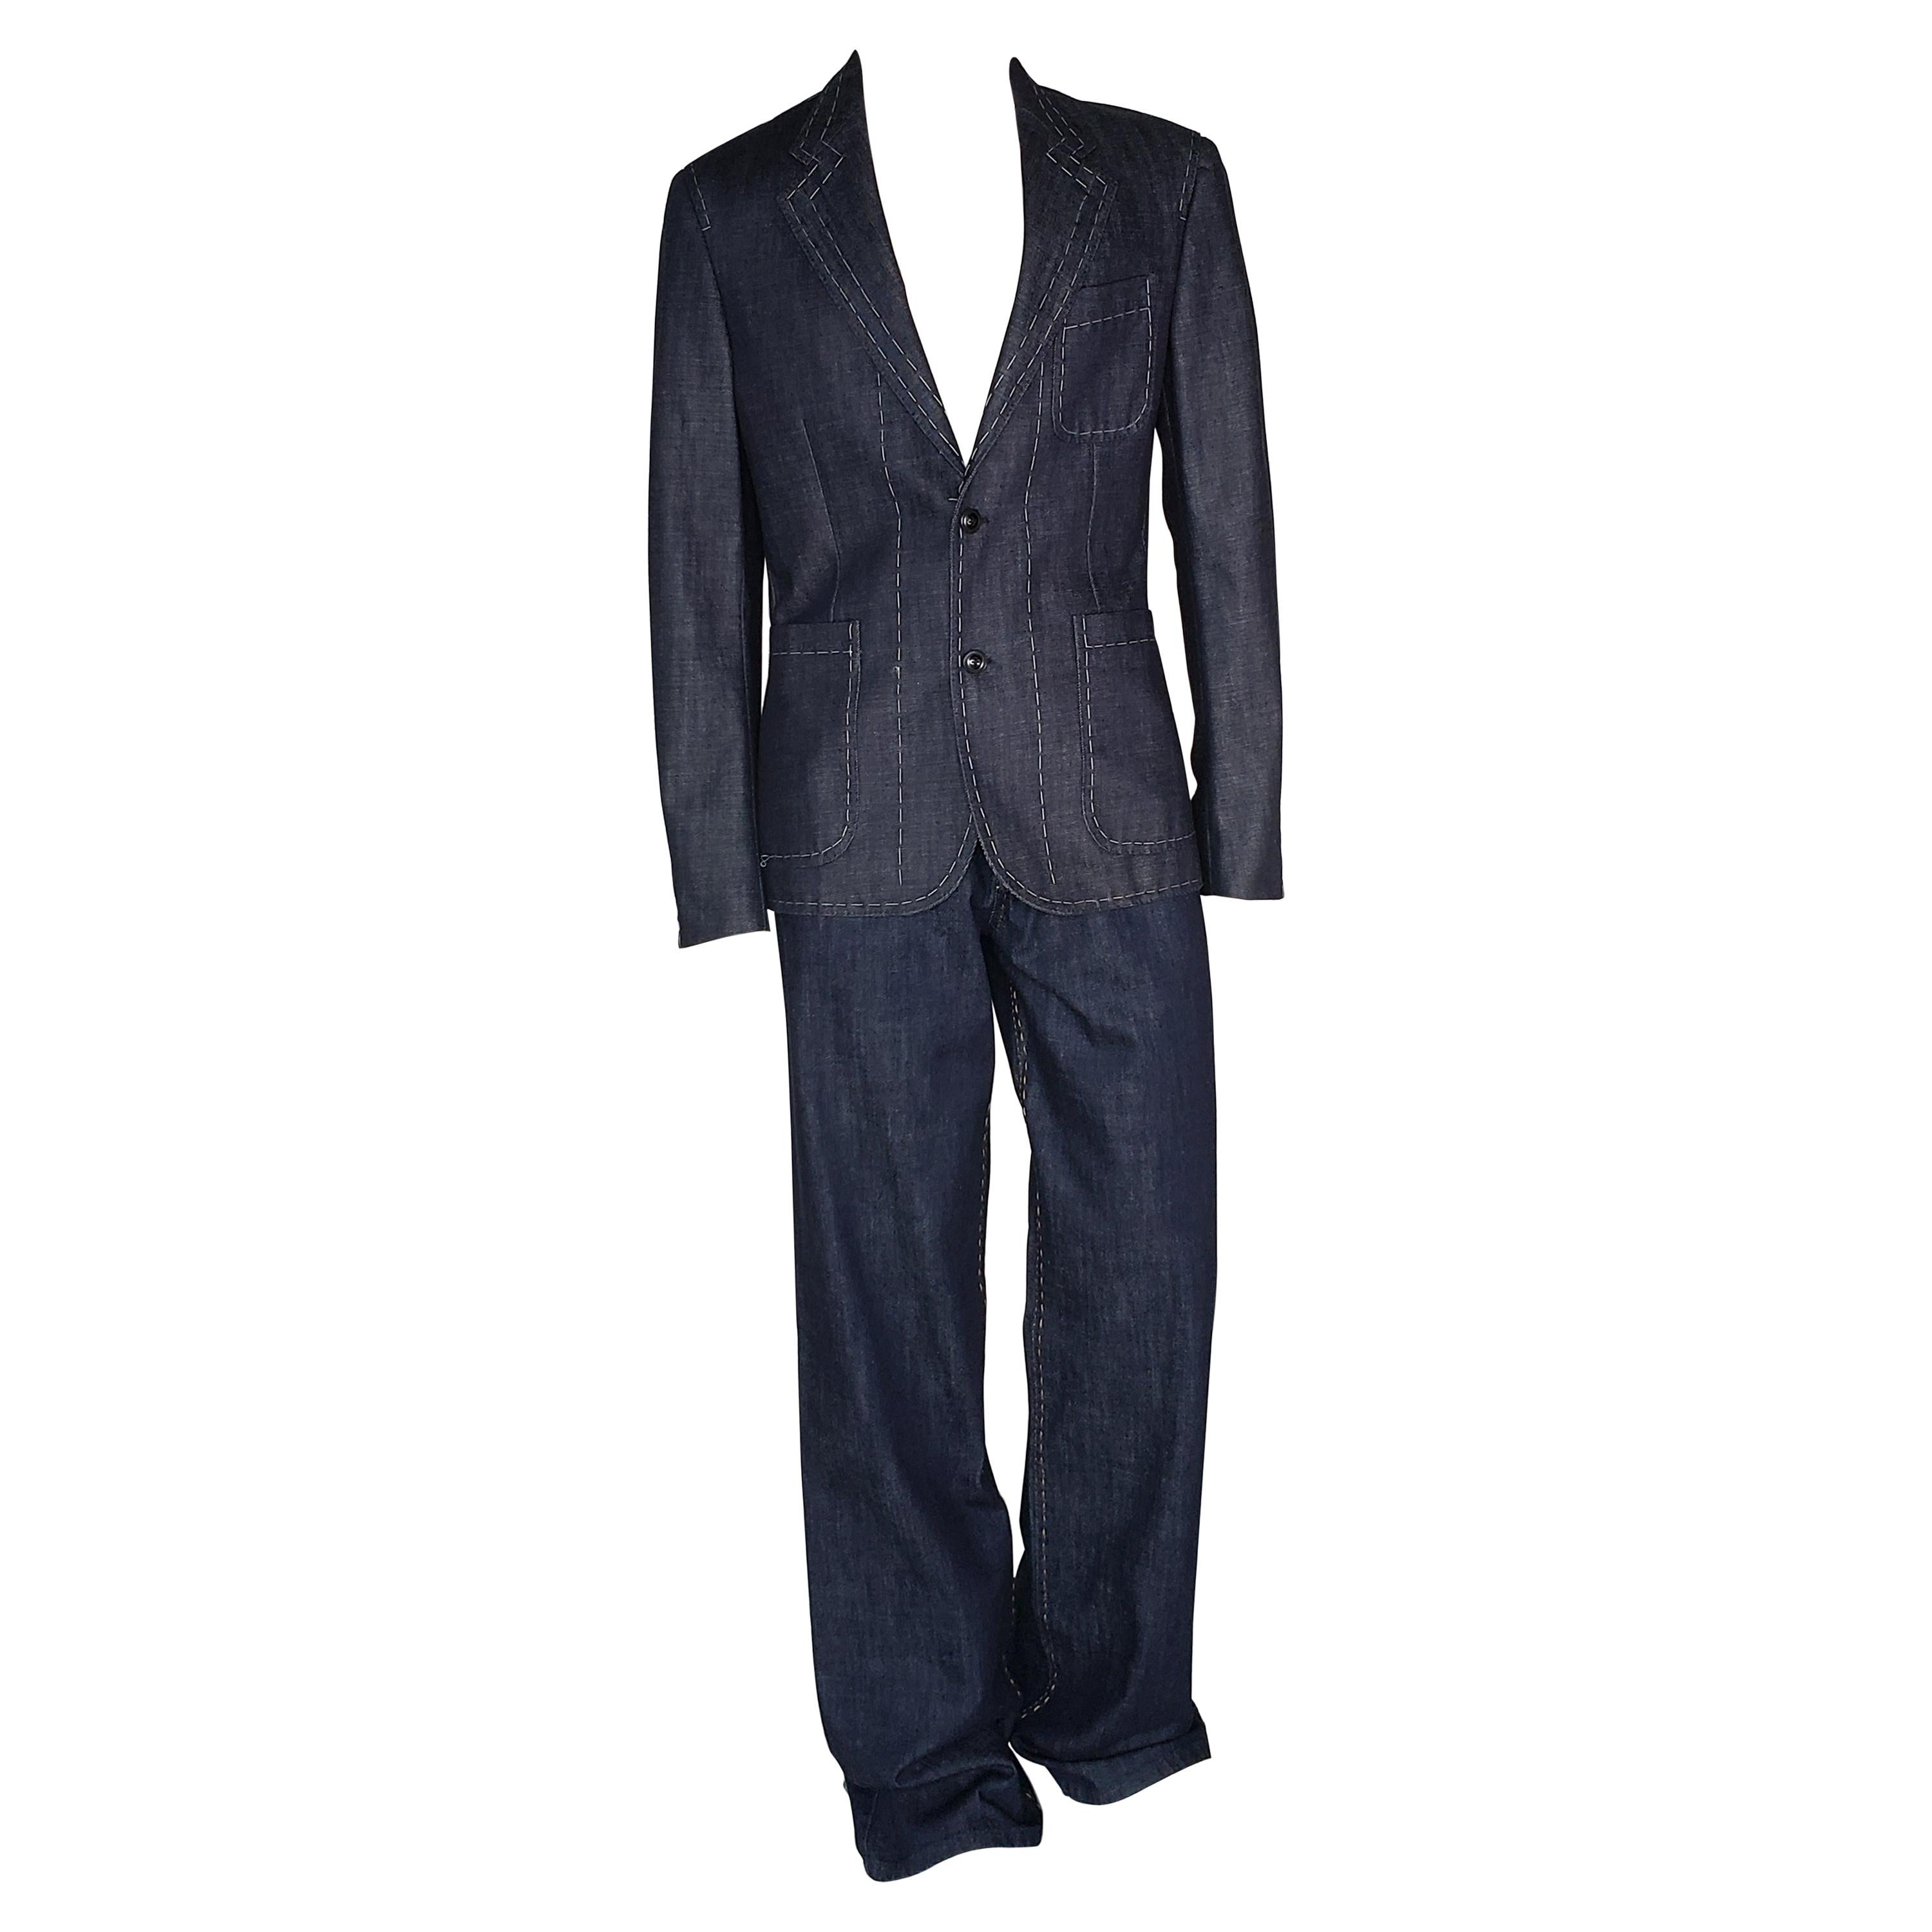 F/W 2015 look #30 NEW VERSACE JEANS SUIT For Sale